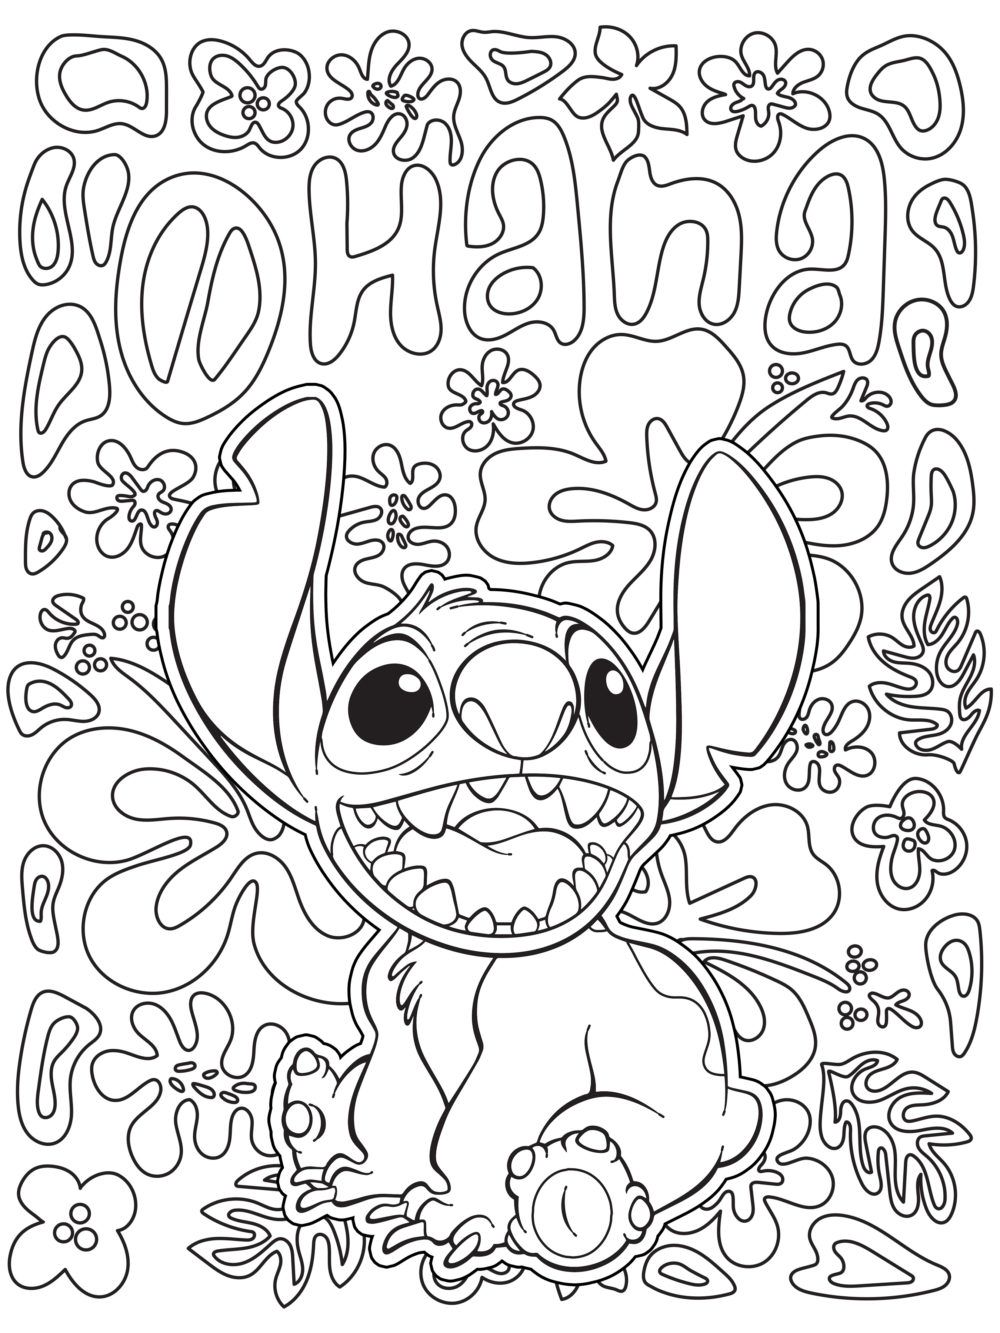 Disney Coloring Pages for Adults - Best Coloring Pages For ...